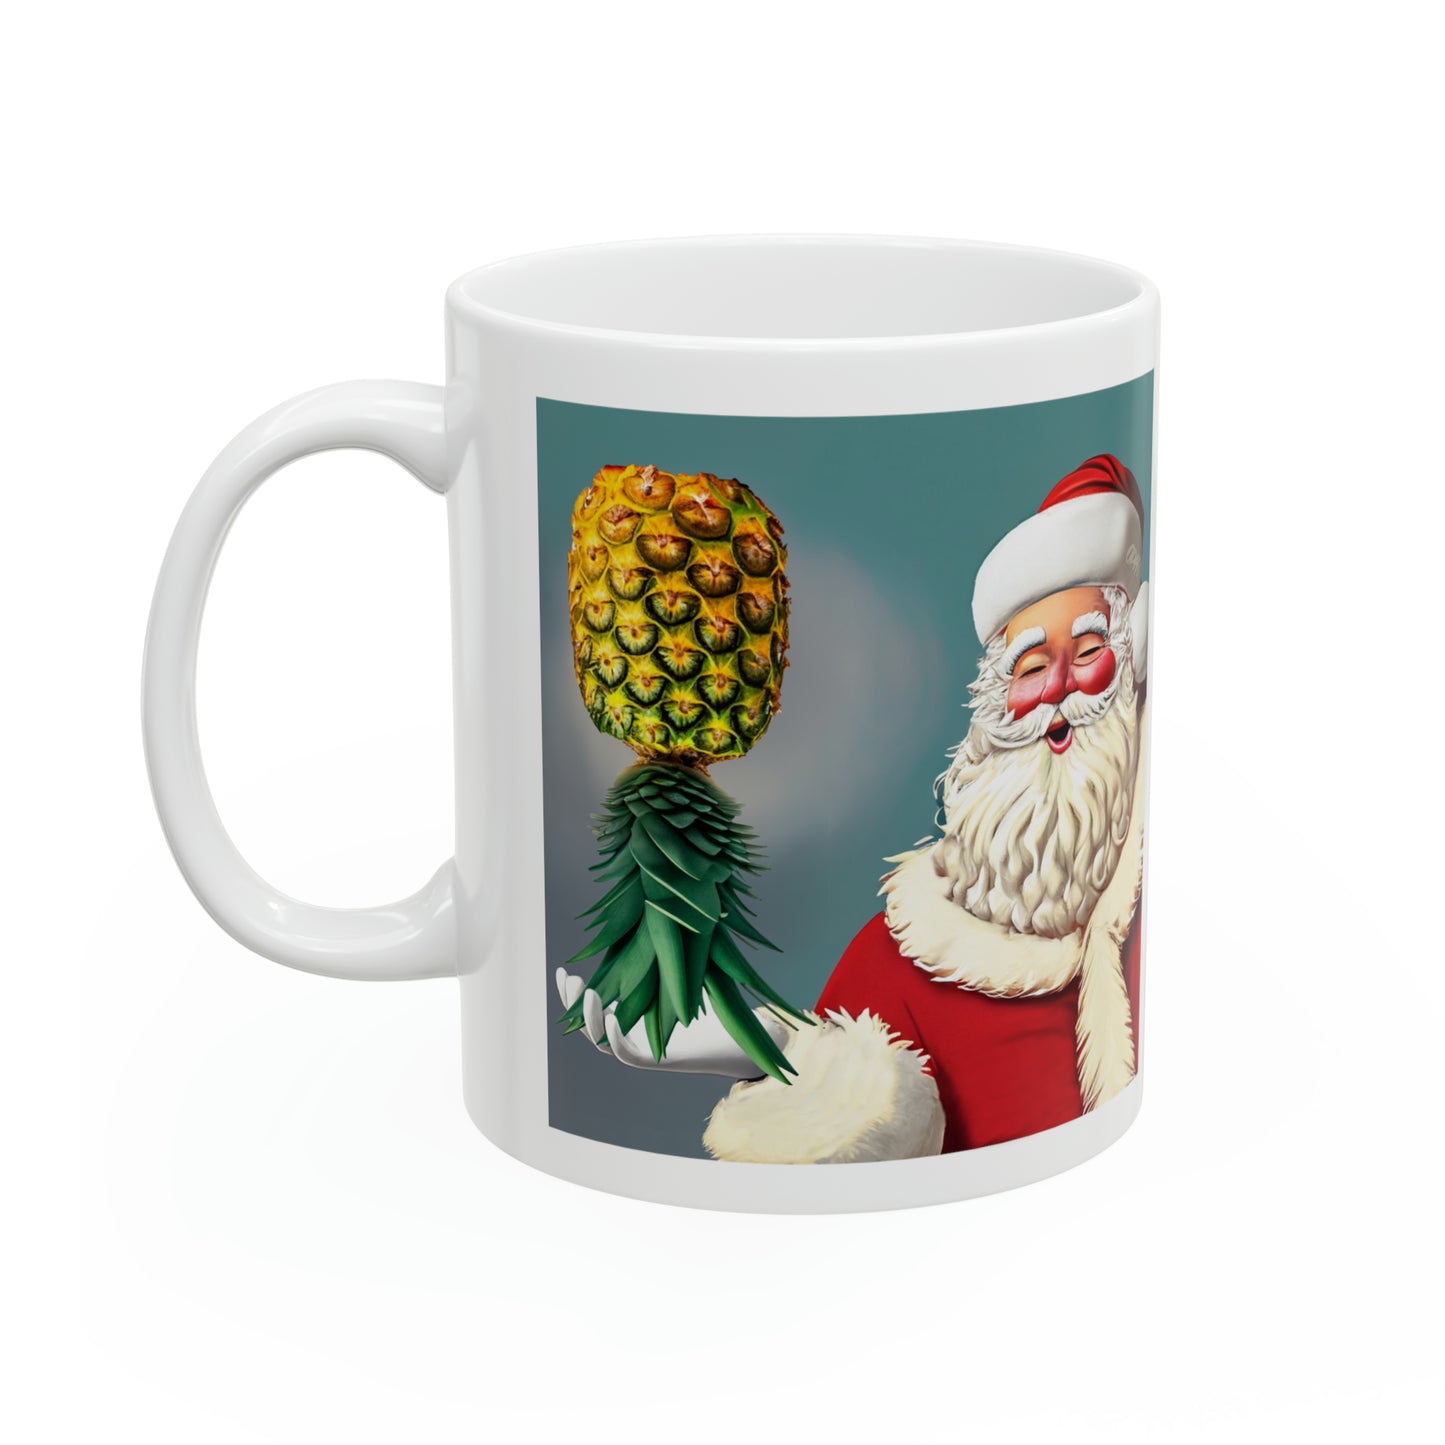 Upside Down Pineapple Santa Claus Christmas Mug Ceramic Mug 11oz Swinger Party Plays Well With Others